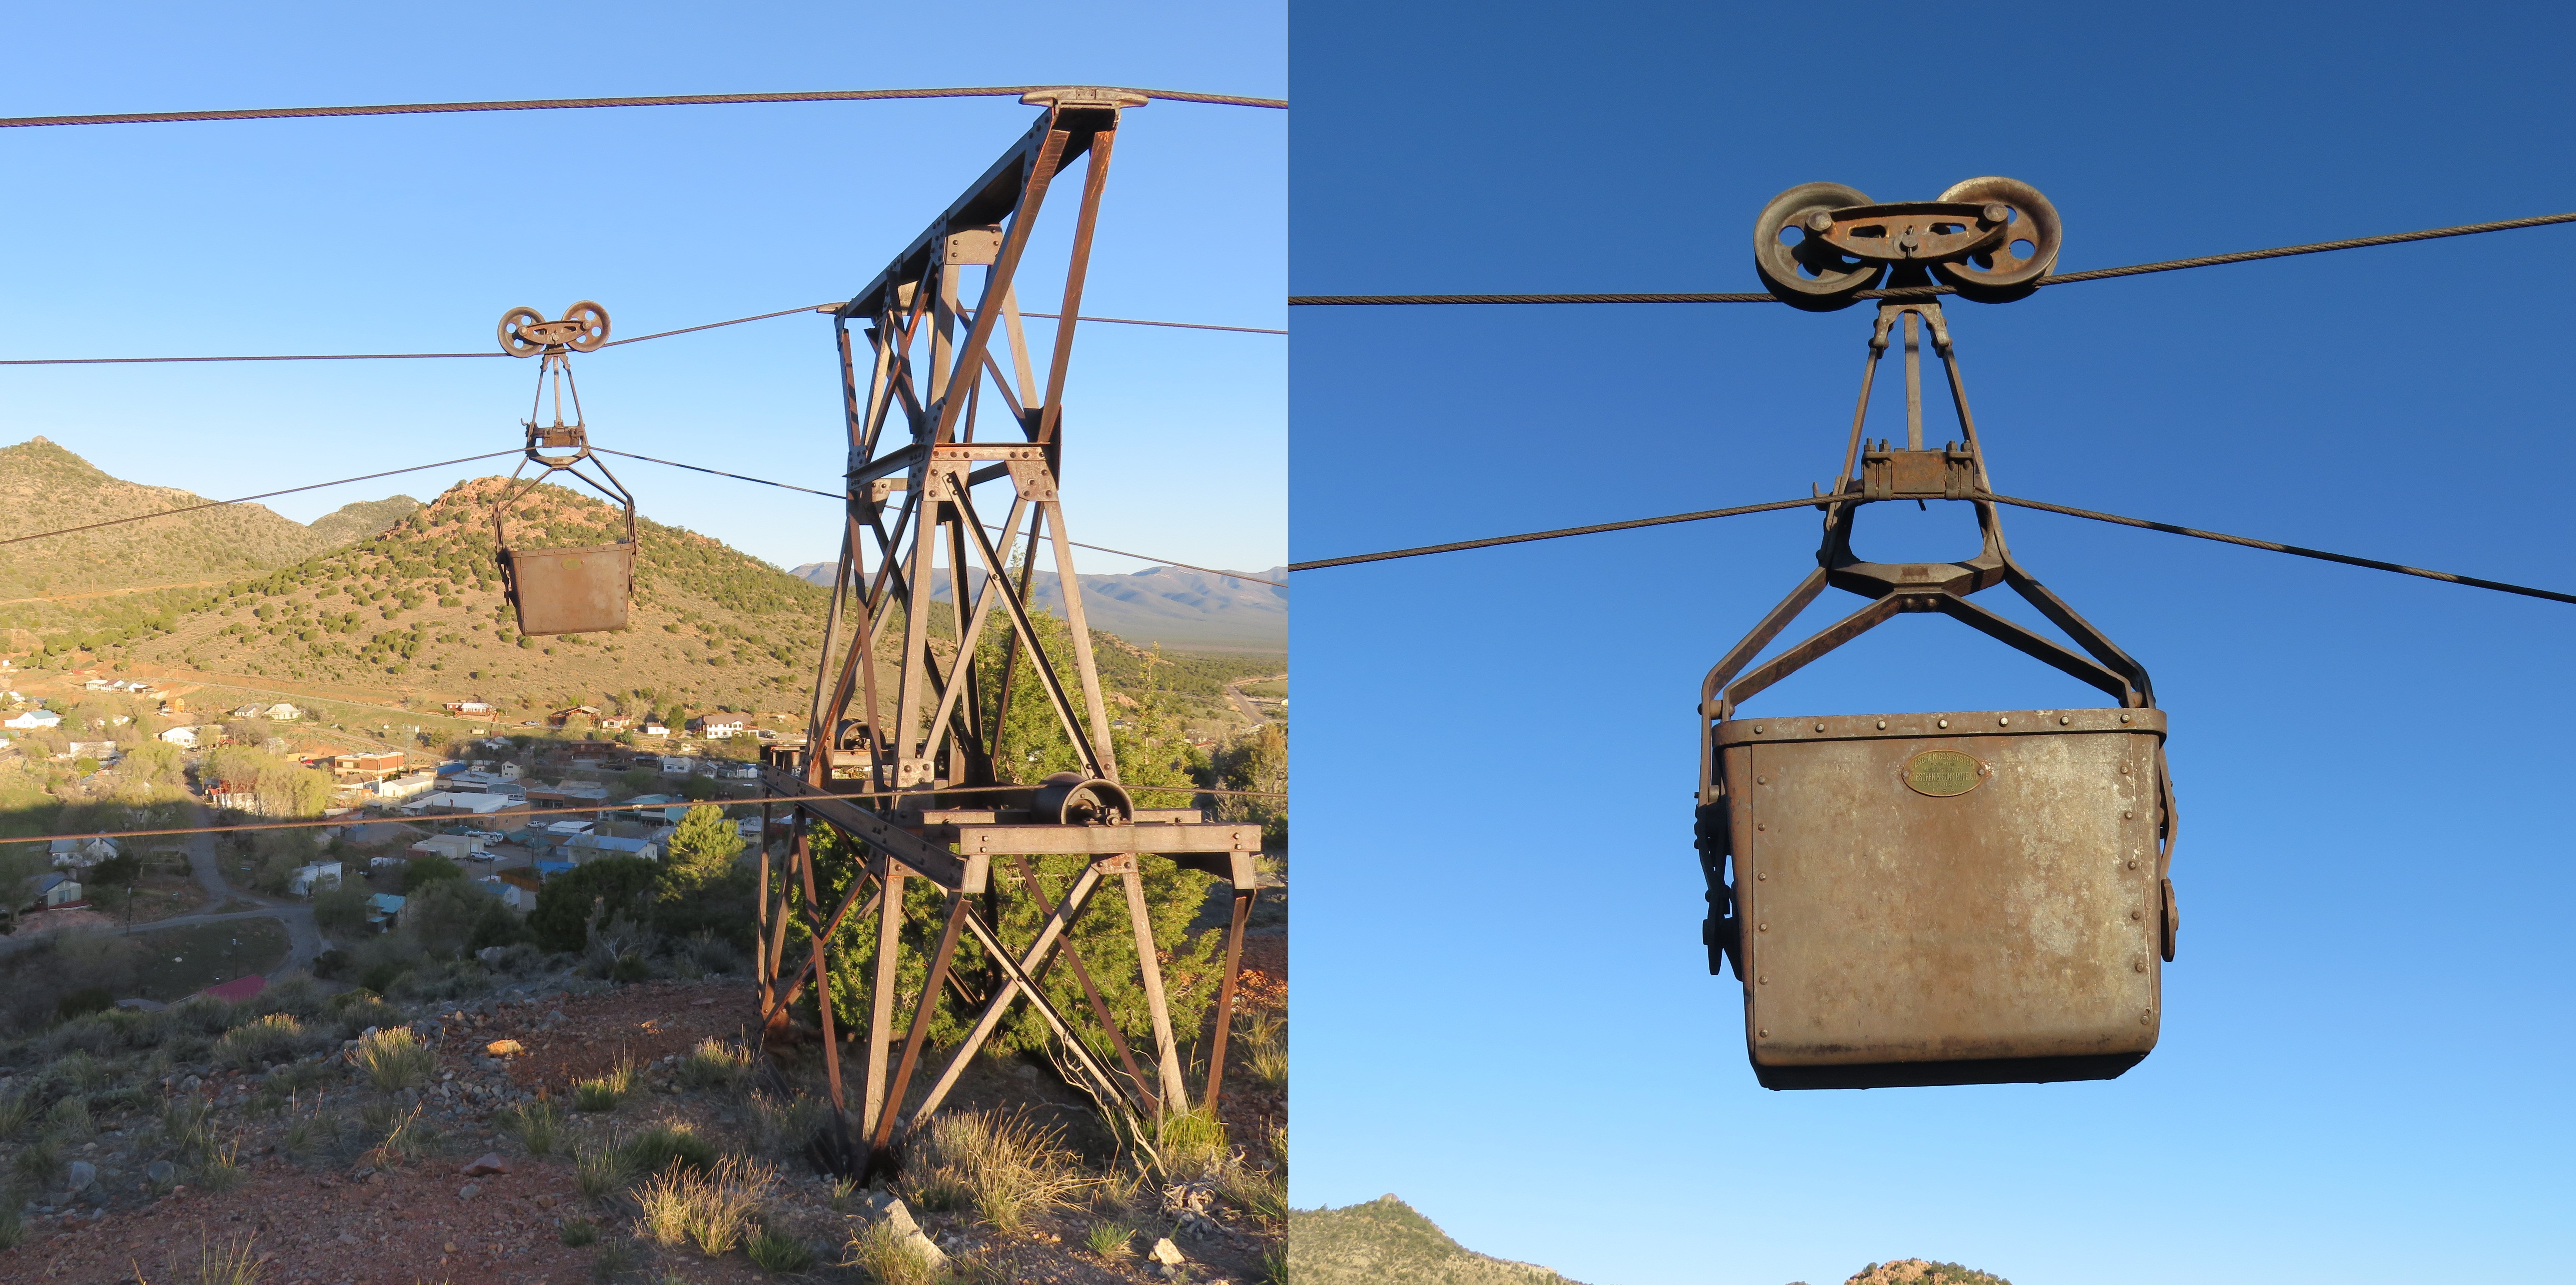 Ore aerial tramway and ore bucket system was built in 1920 and operated until the early 1930s in Pioche, Lincoln